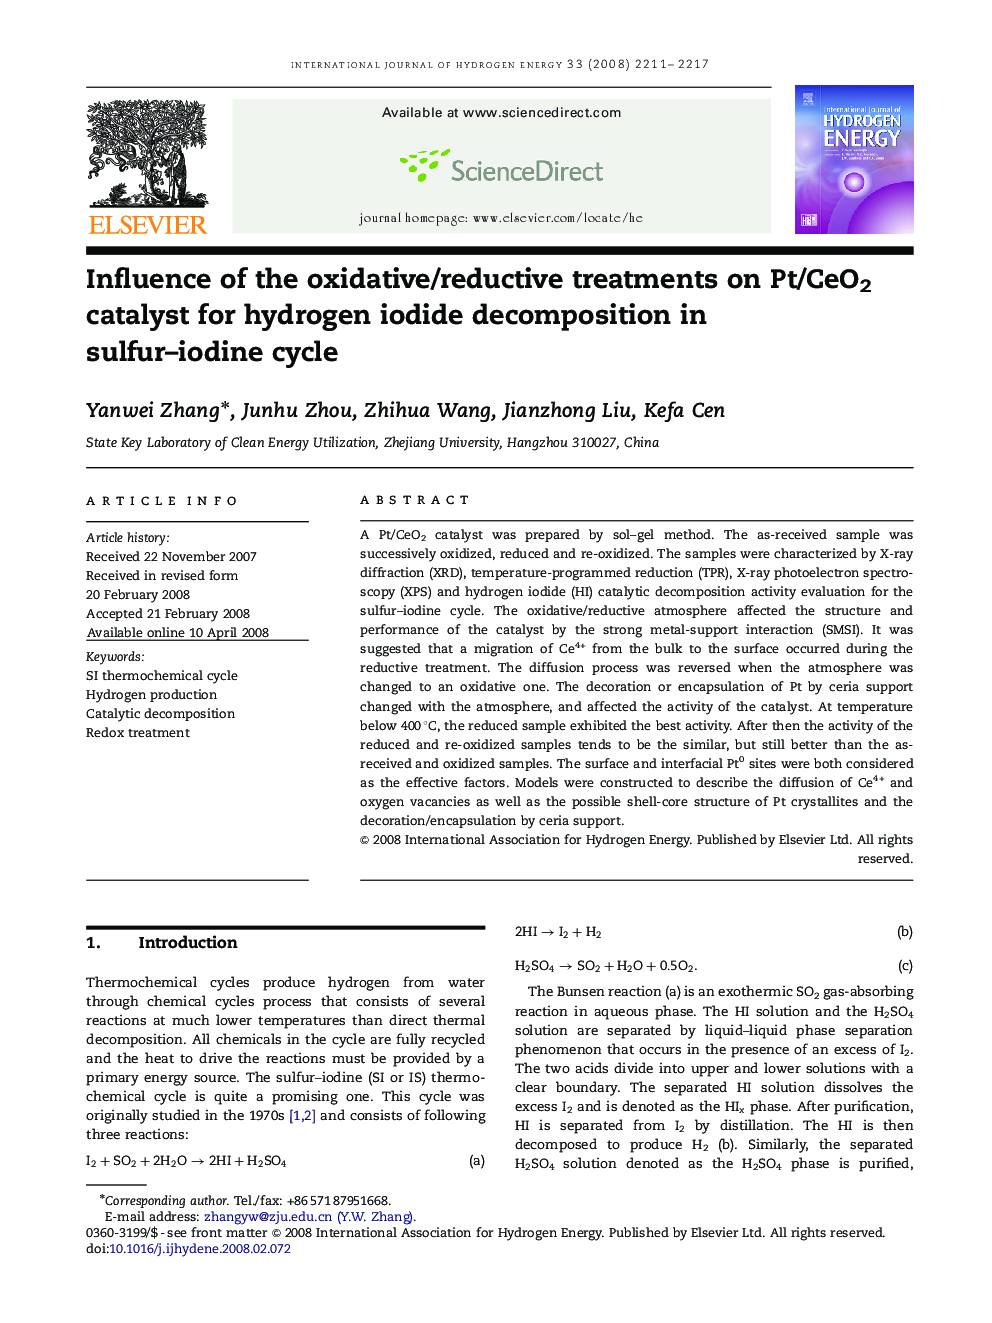 Influence of the oxidative/reductive treatments on Pt/CeO2 catalyst for hydrogen iodide decomposition in sulfur–iodine cycle